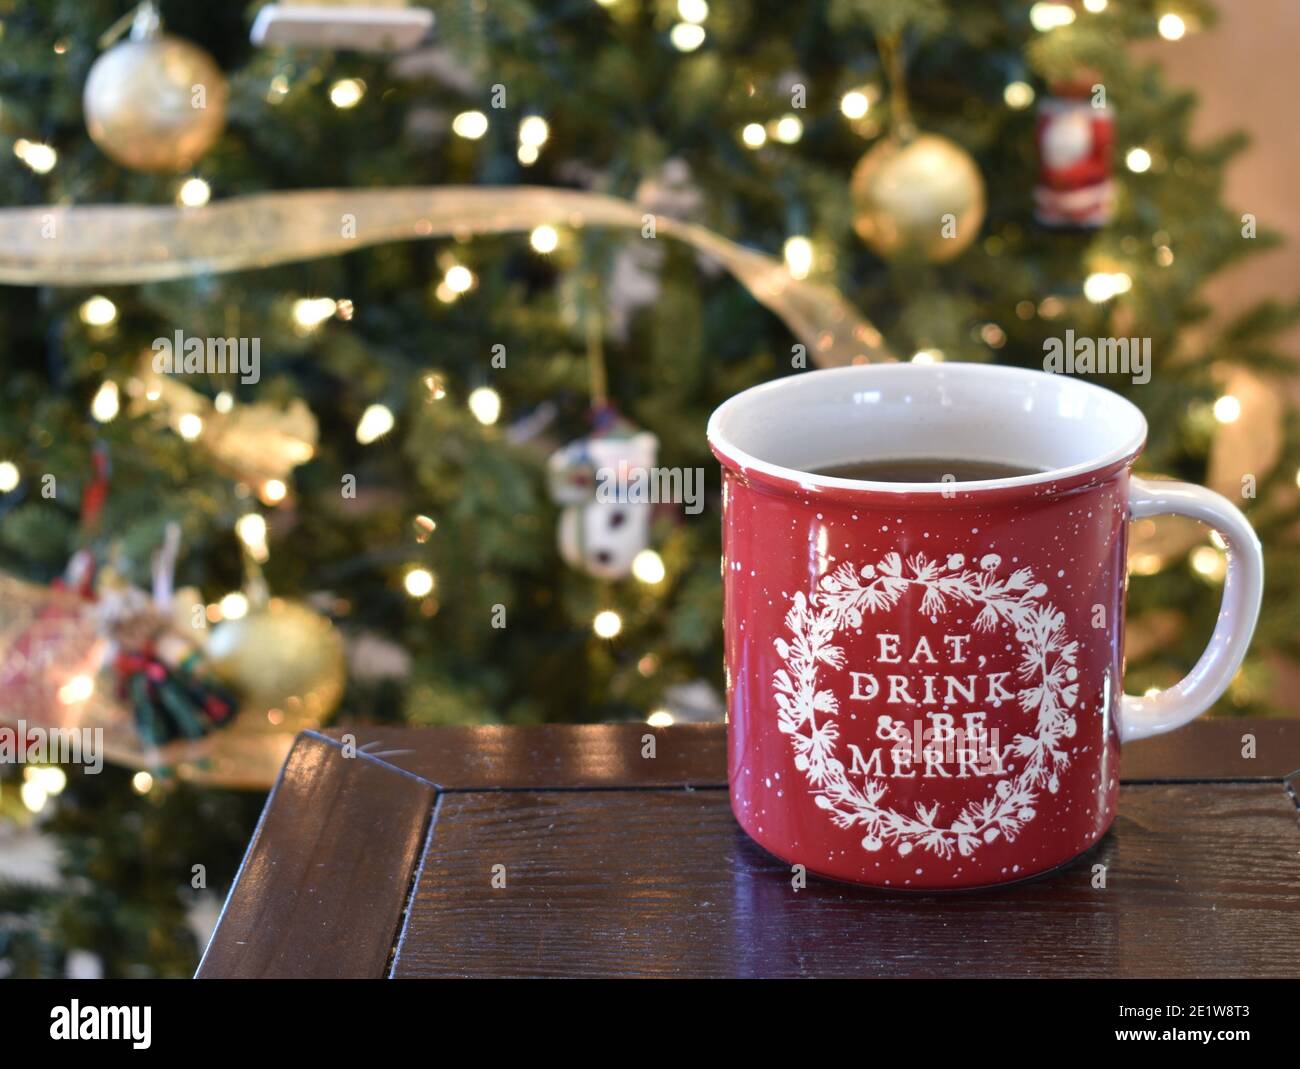 https://c8.alamy.com/comp/2E1W8T3/holiday-picture-with-a-festive-coffee-mug-and-a-christmas-tree-in-the-background-2E1W8T3.jpg